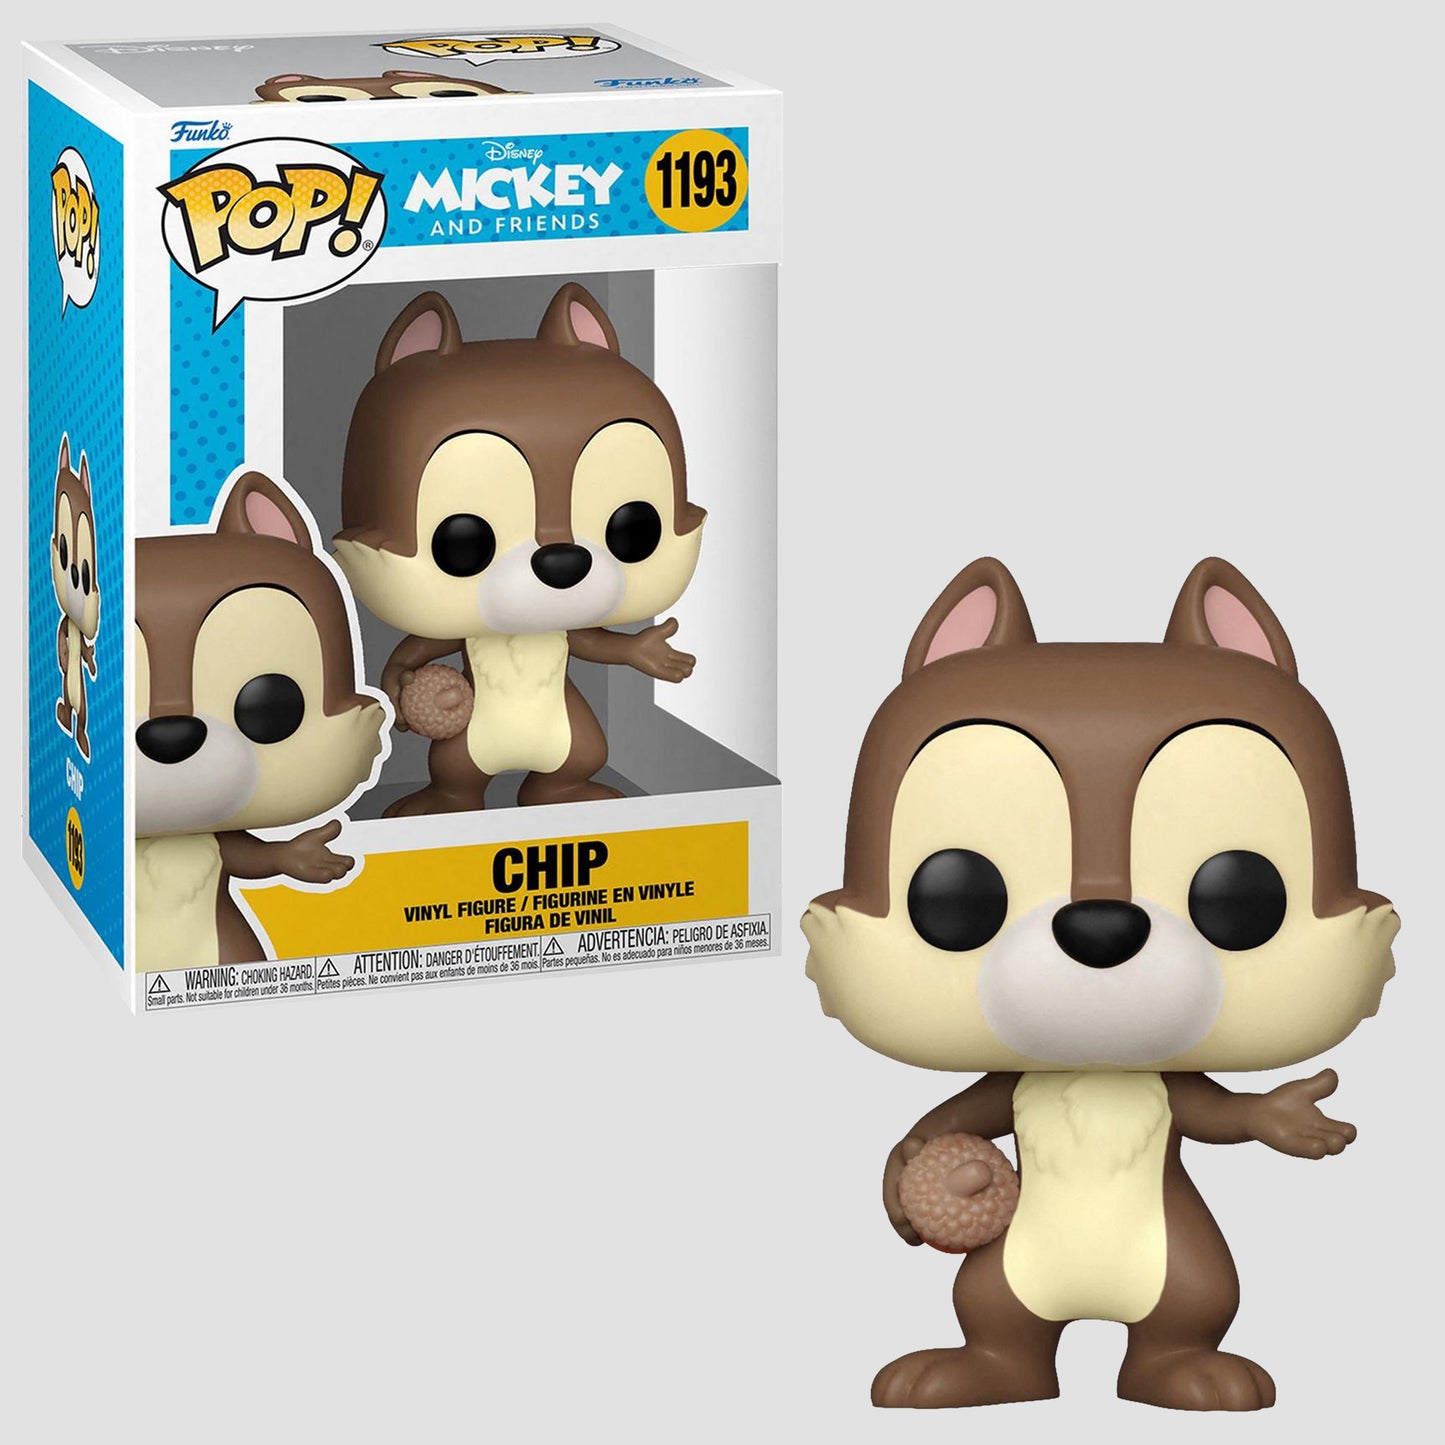 Videnskab Stor eg Modtagelig for Chip (Mickey and Friends) Disney Funko Pop! – Collector's Outpost